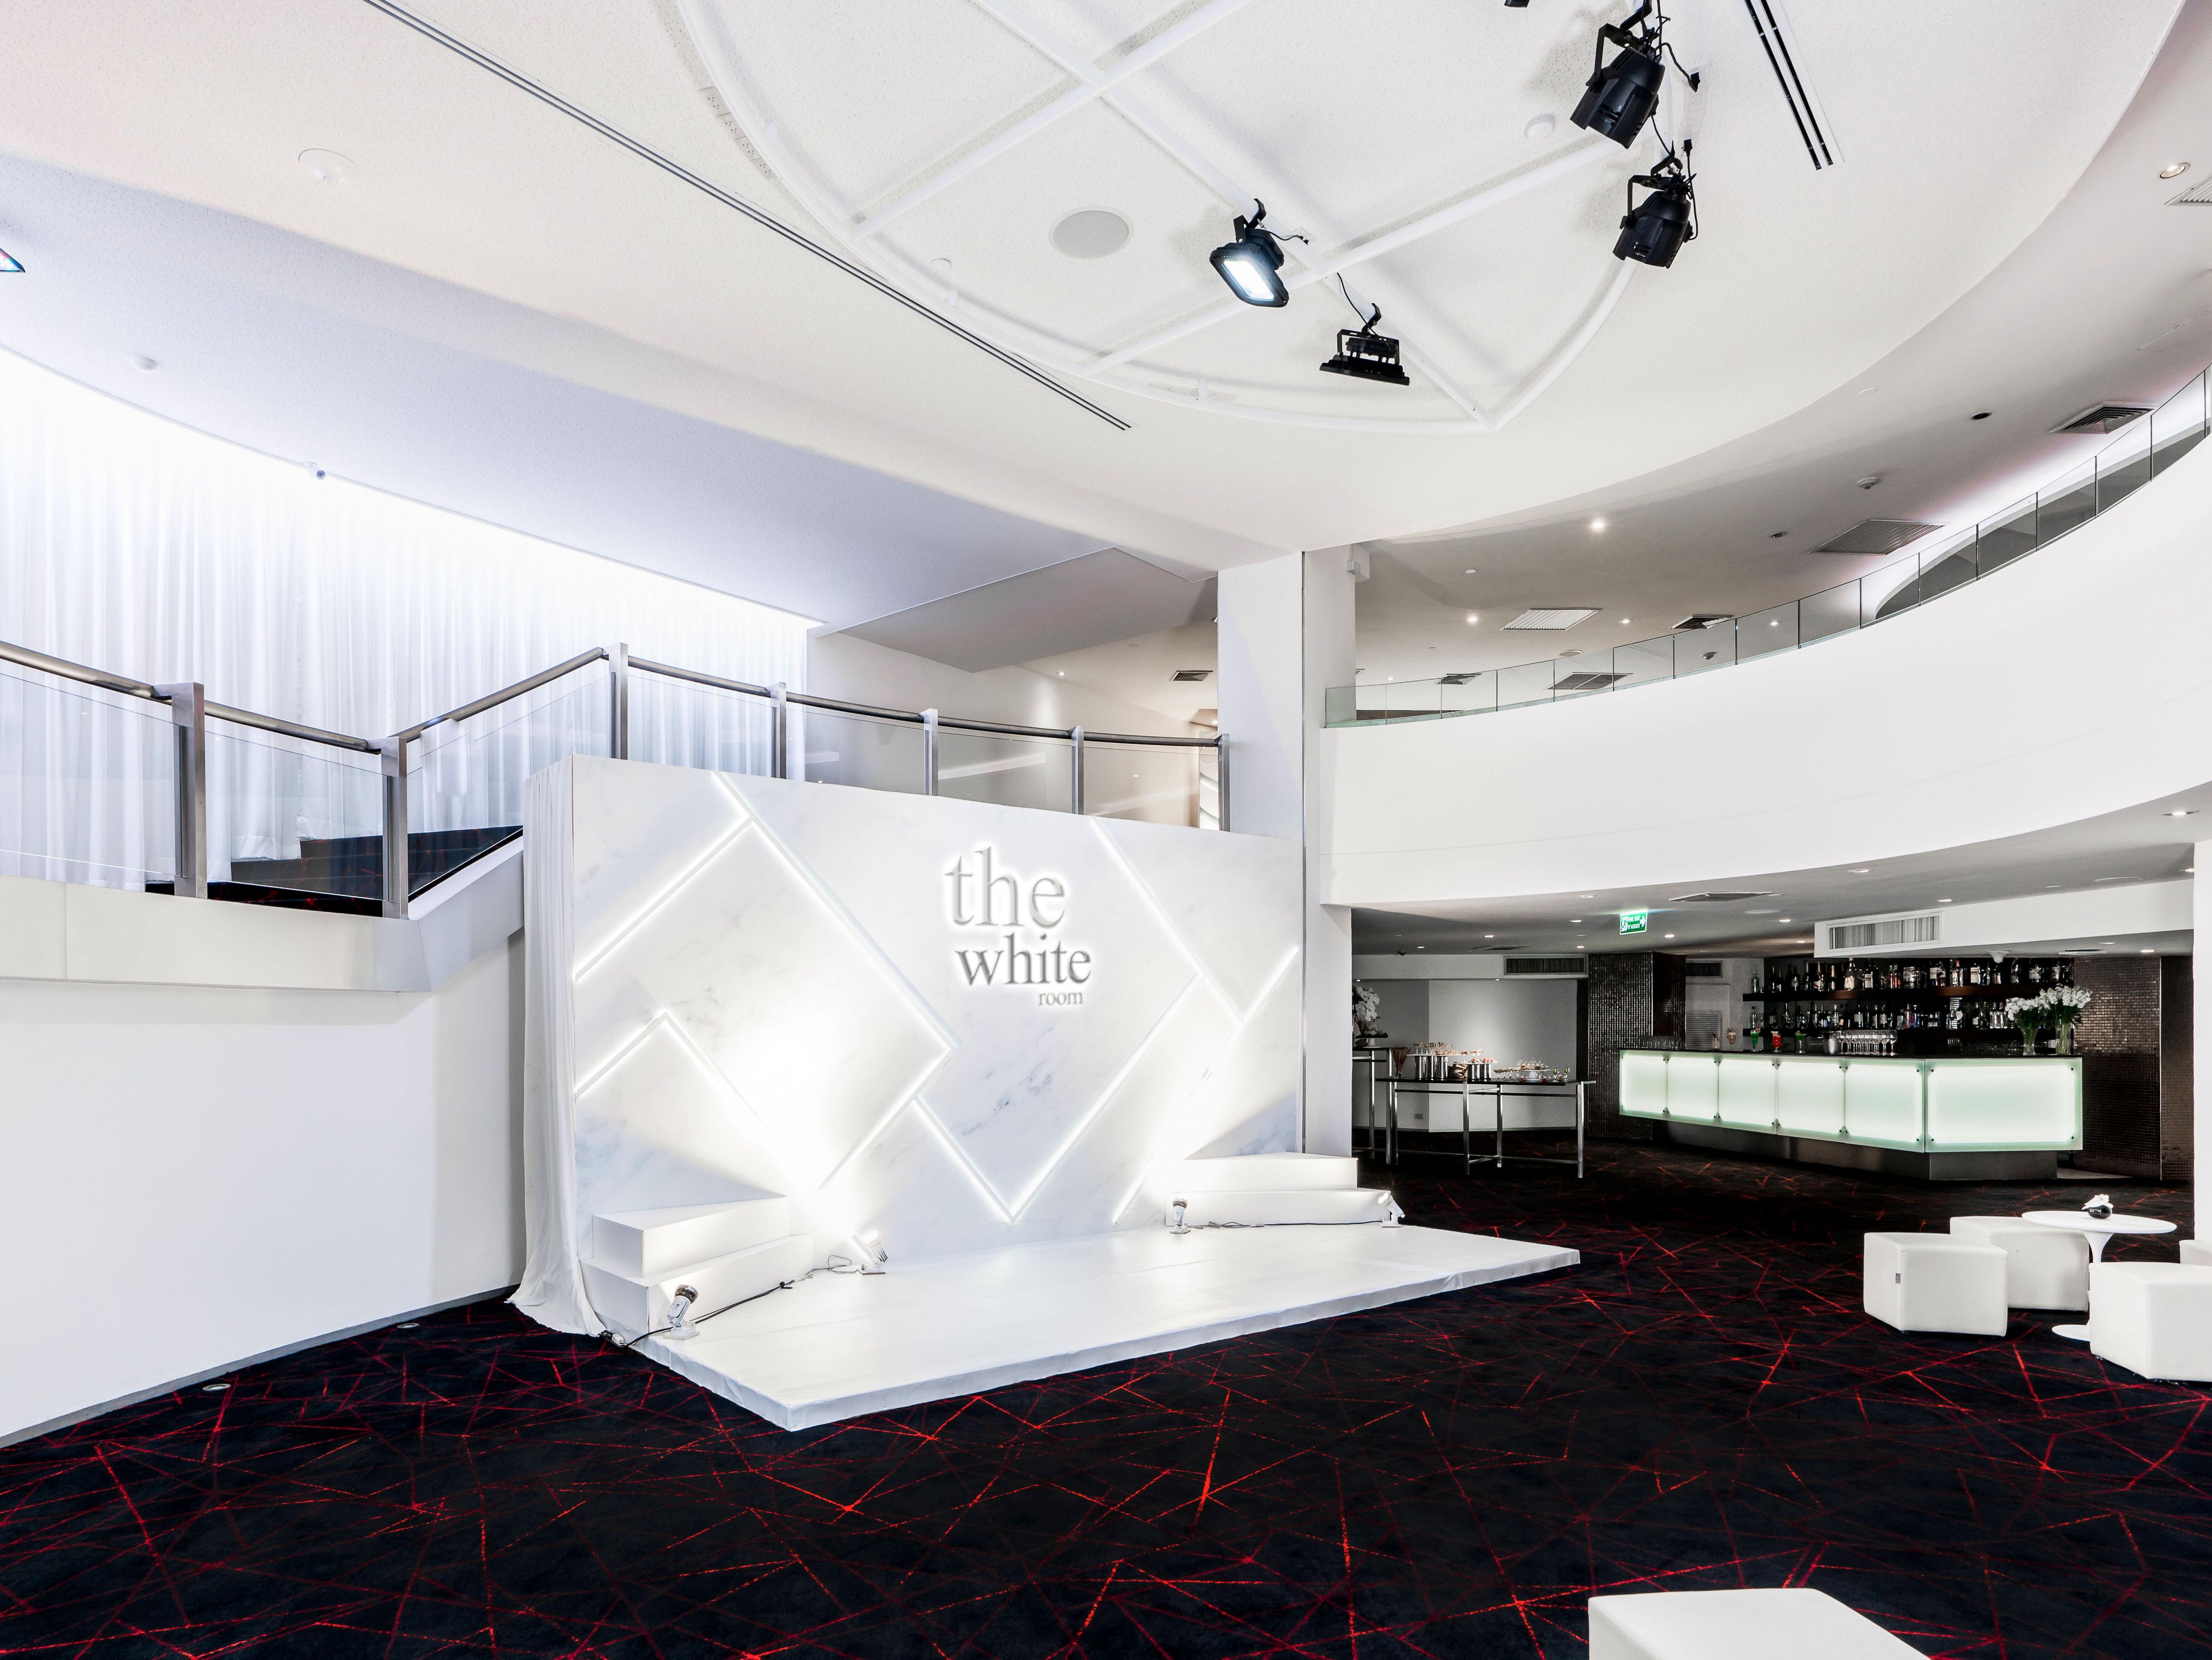 The White Room is a 684 sq.m private event space with a capacity for 350 guests, spread across two floors. Its curved walkways, high ceilings, state-of-the-art technology and latest upgraded infrastructure are perfect for your event.